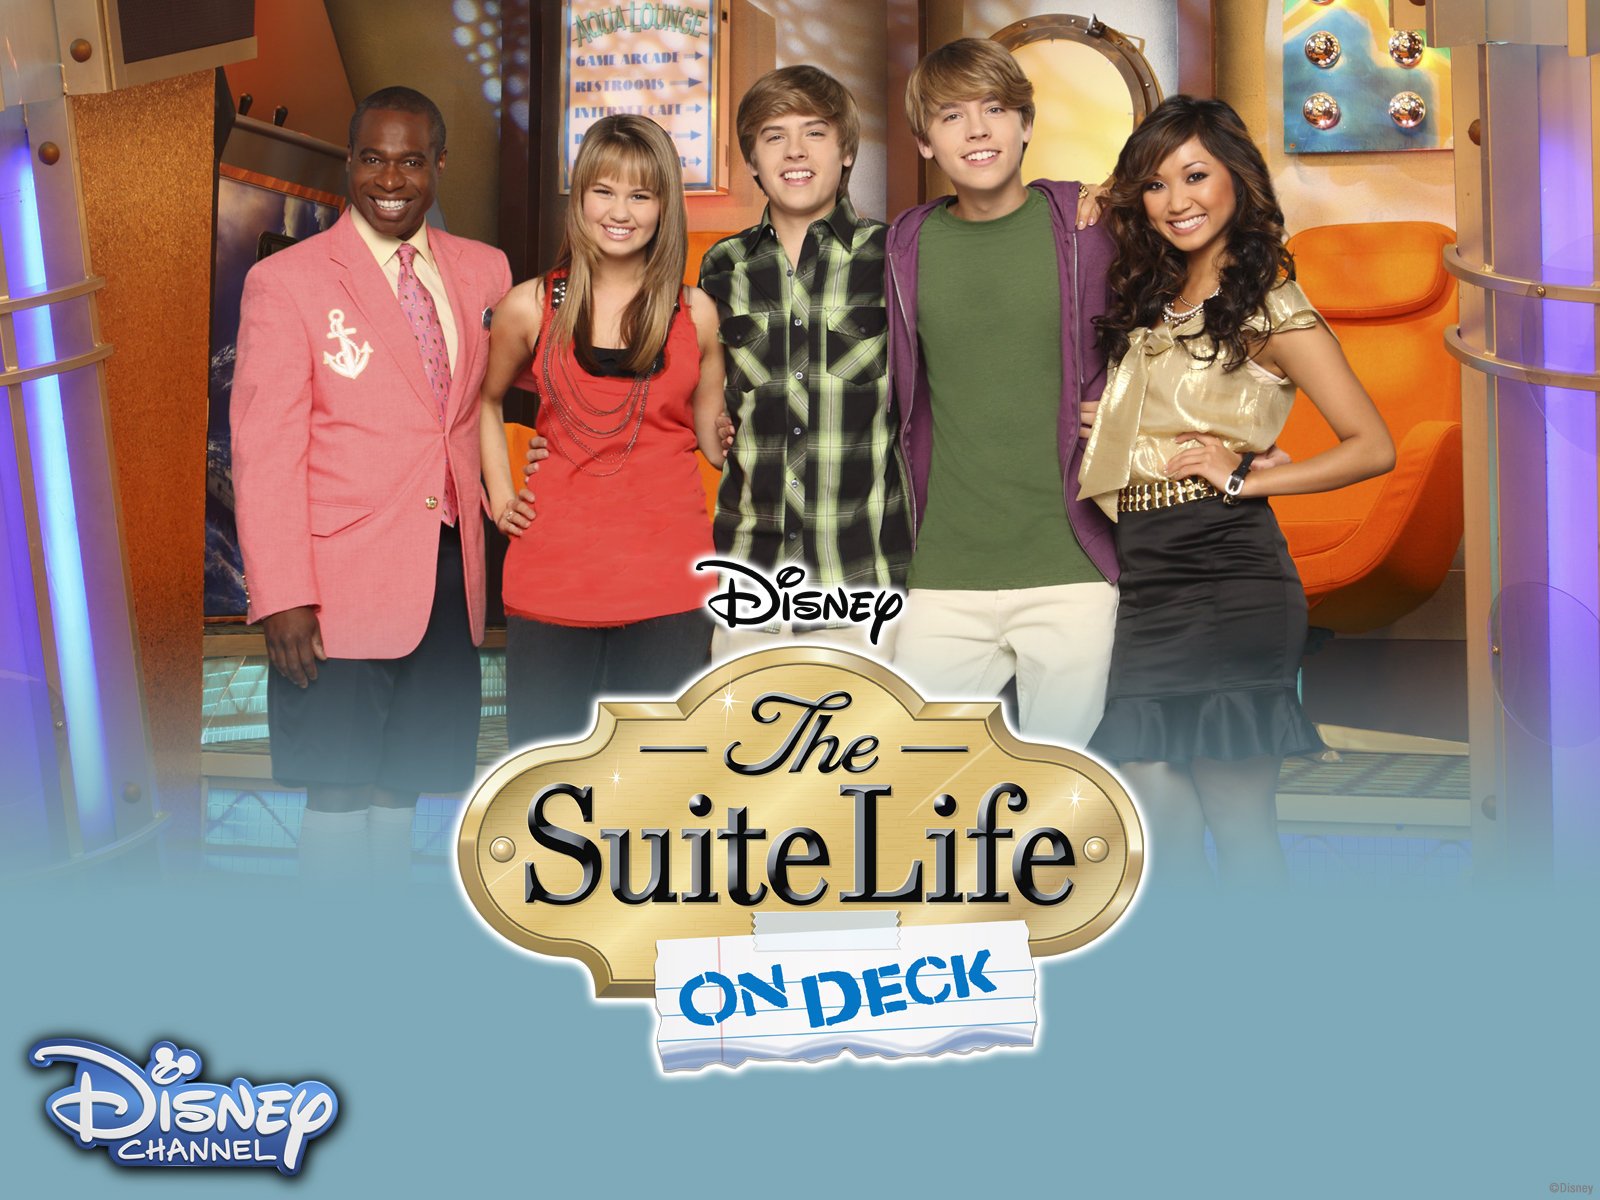 The fourth season of The Suite Life on Deck. 